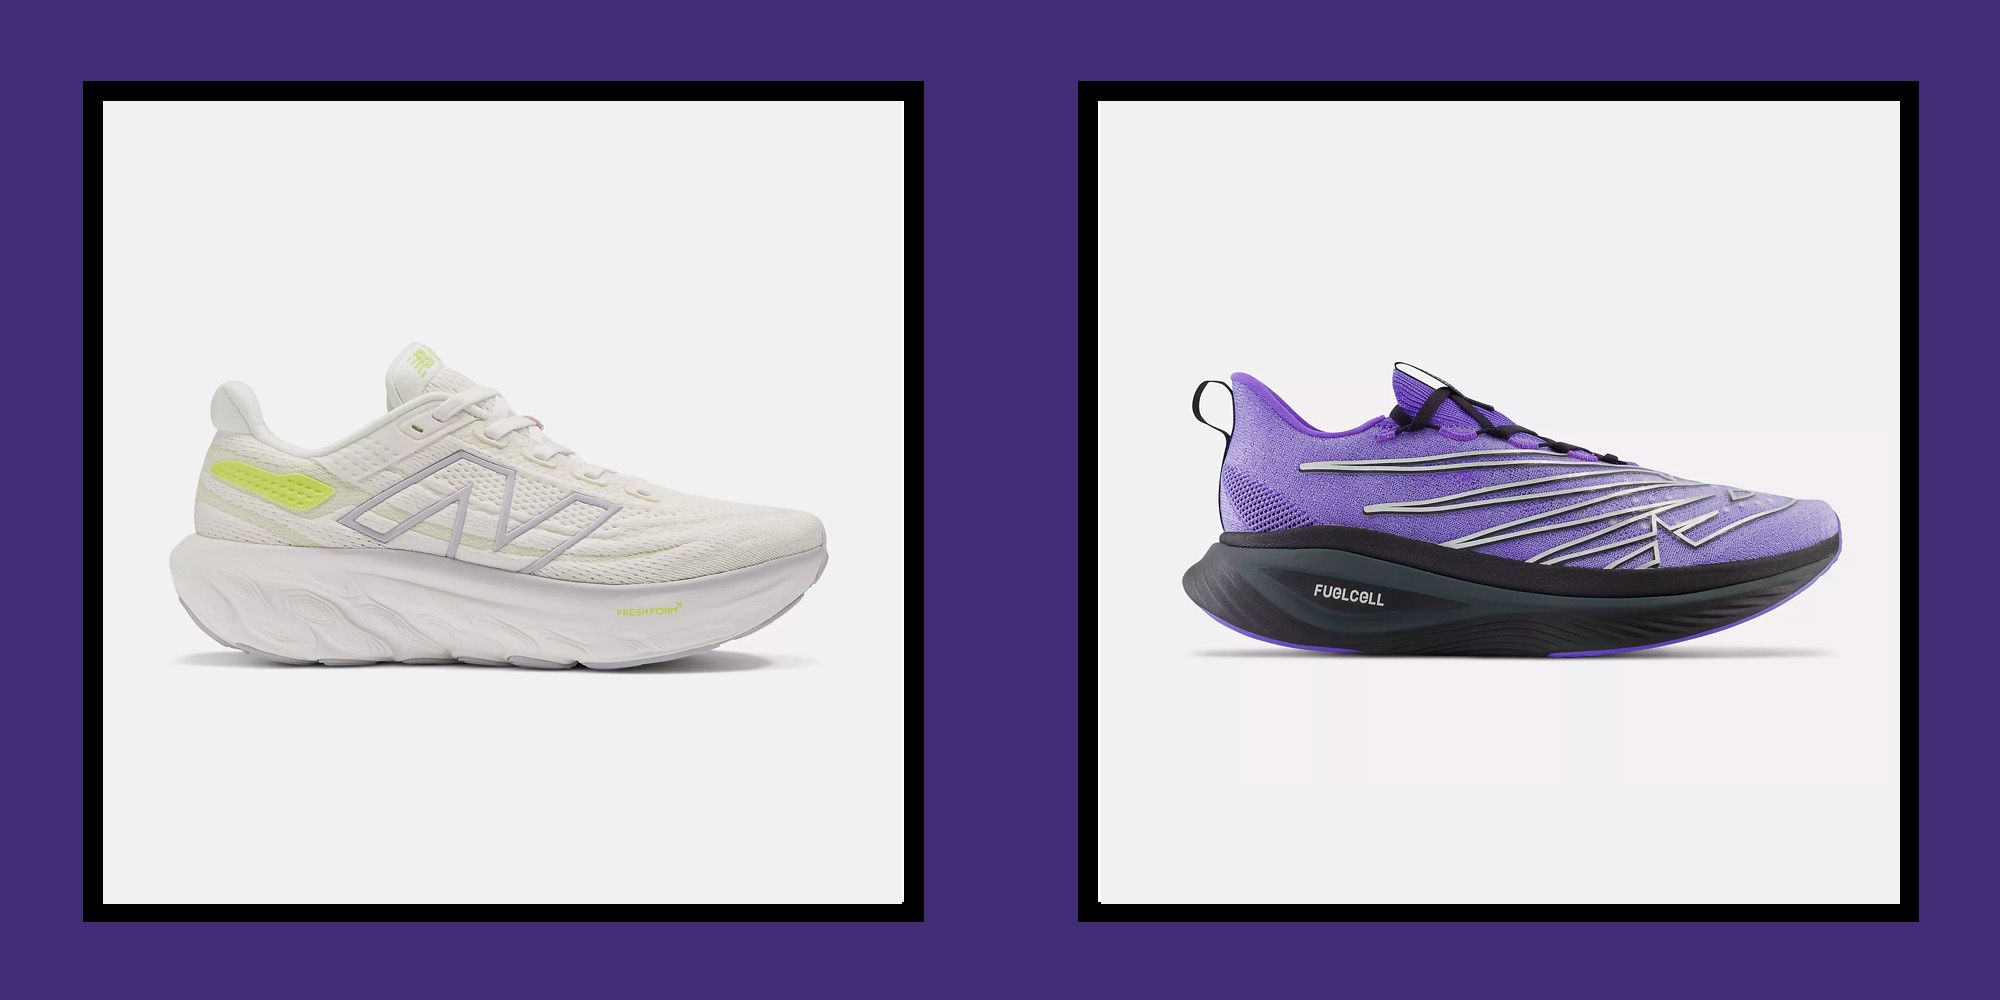 The 13 Best New Balance Shoes of 2023